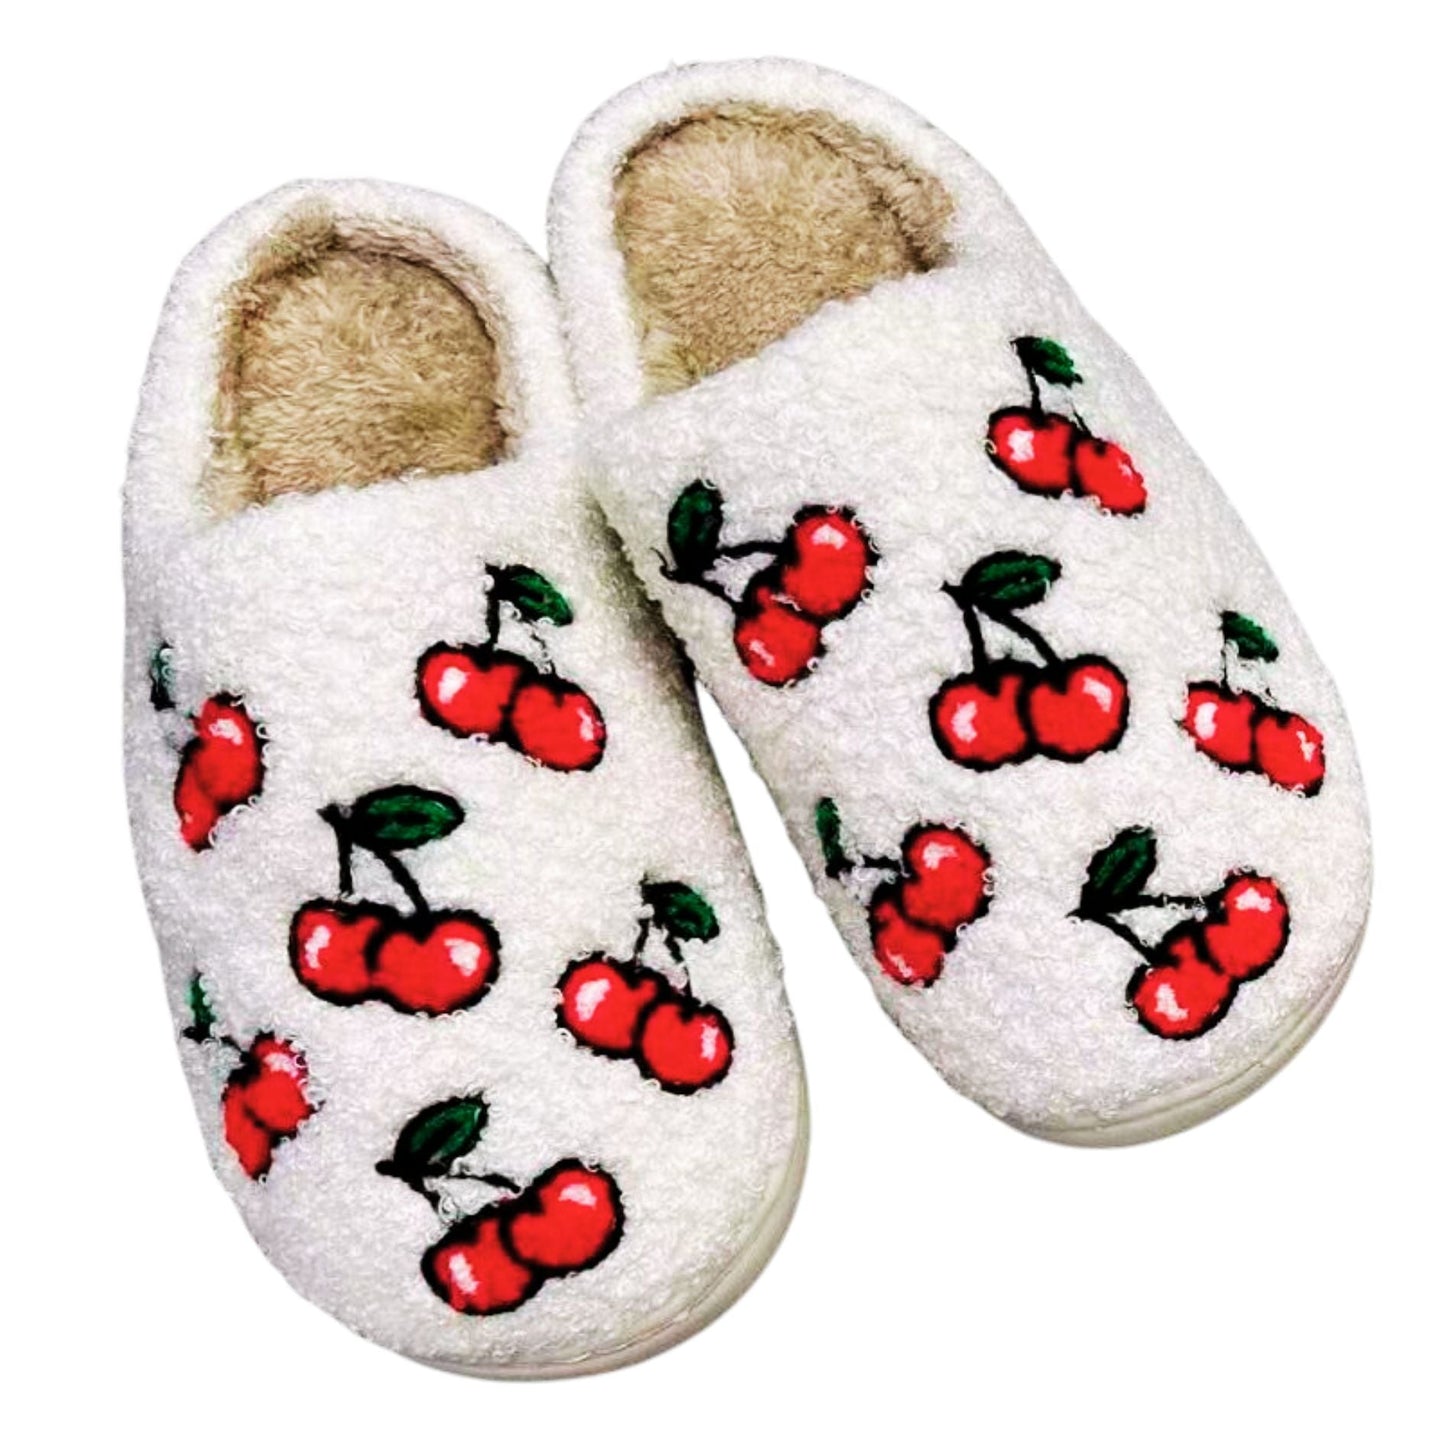 [SIZE SMALL ONLY REMAINING] Cherries Plush Cozy Women's Slippers | Giftable Slip-On Mules House Shoes